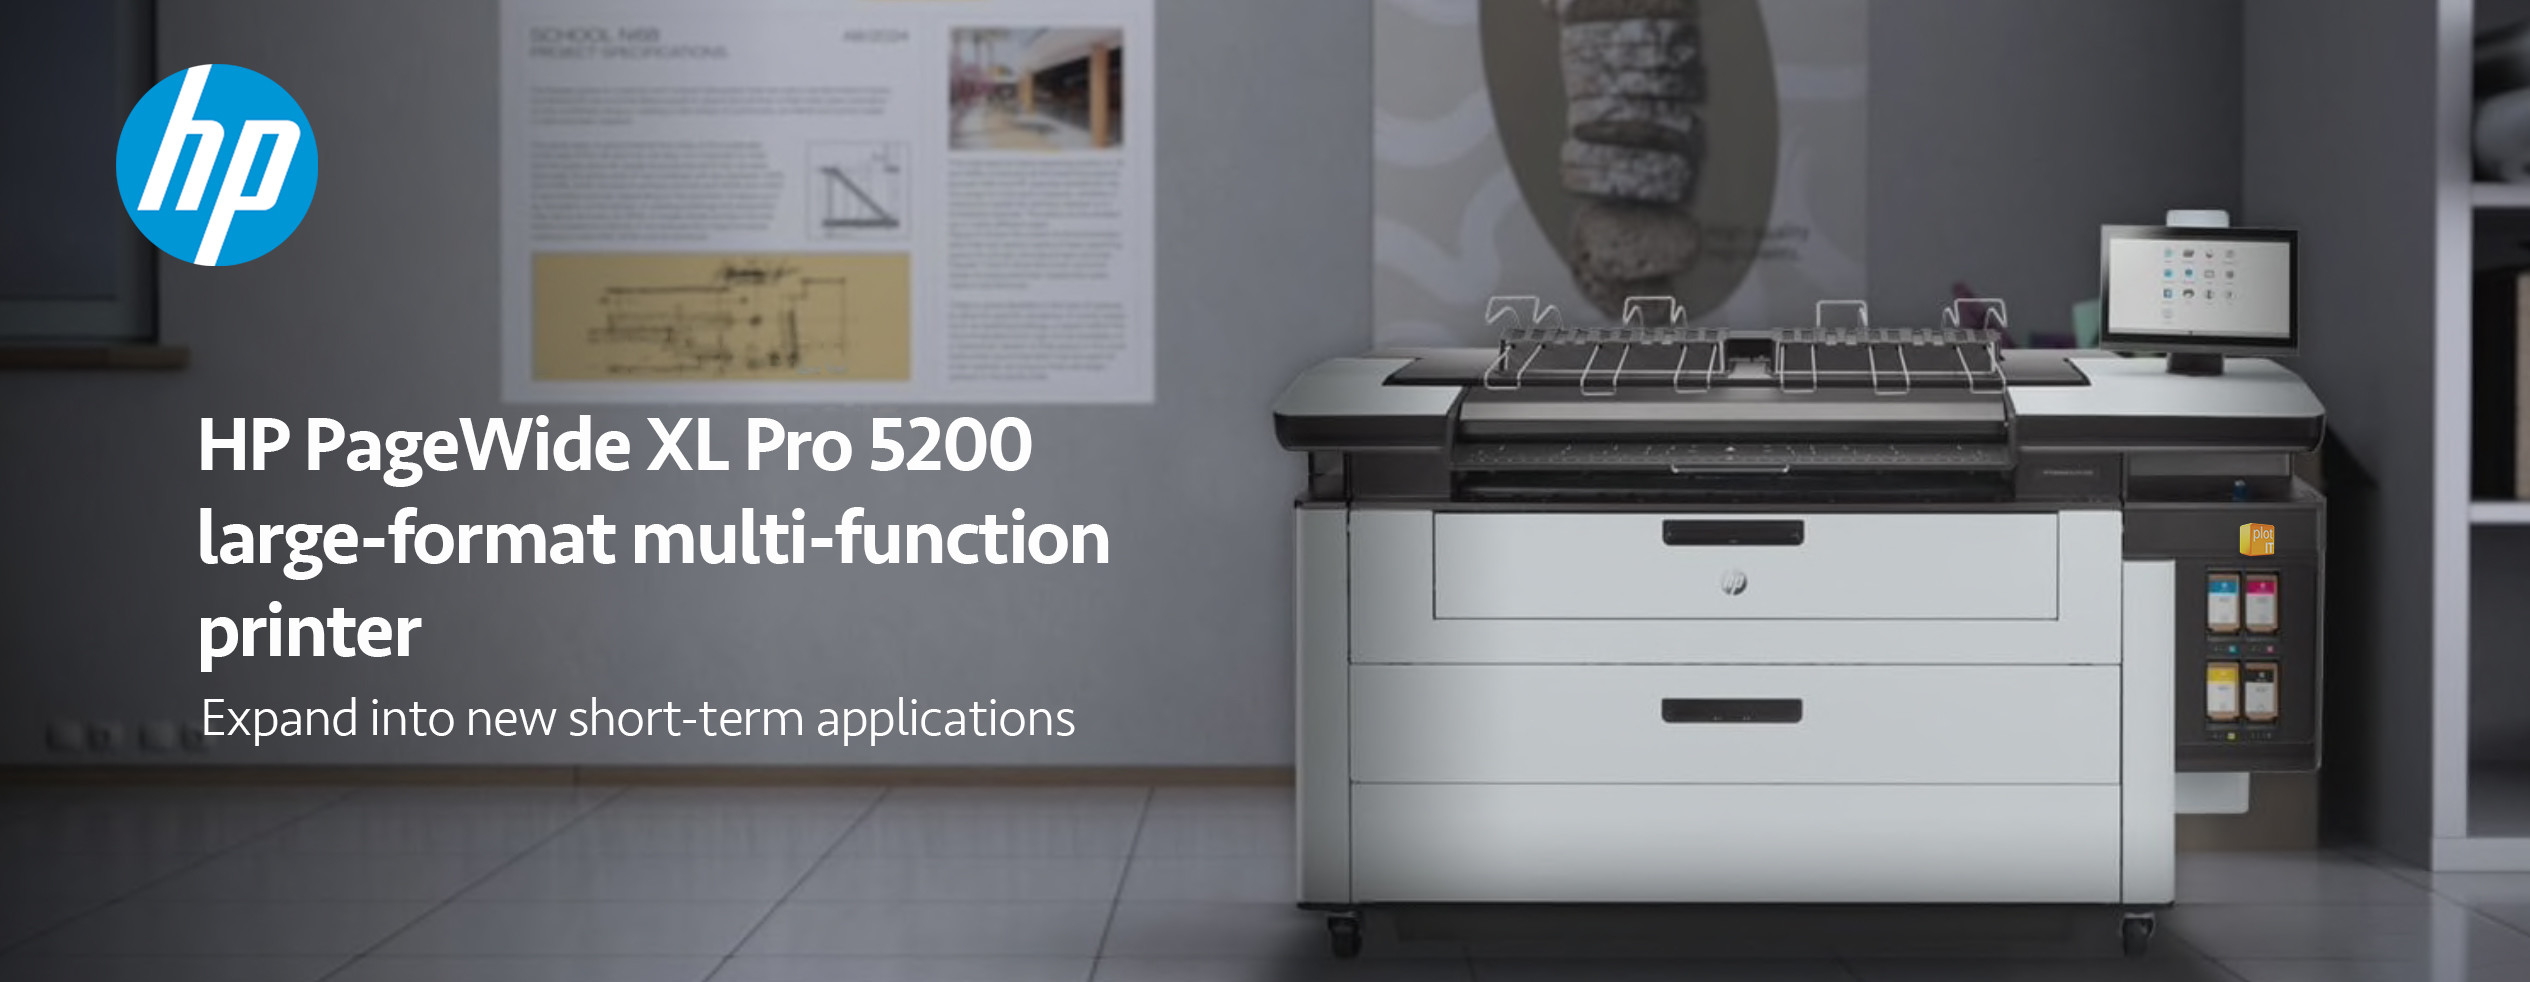 HP PageWide XL Pro 5200 MAIN BANNER